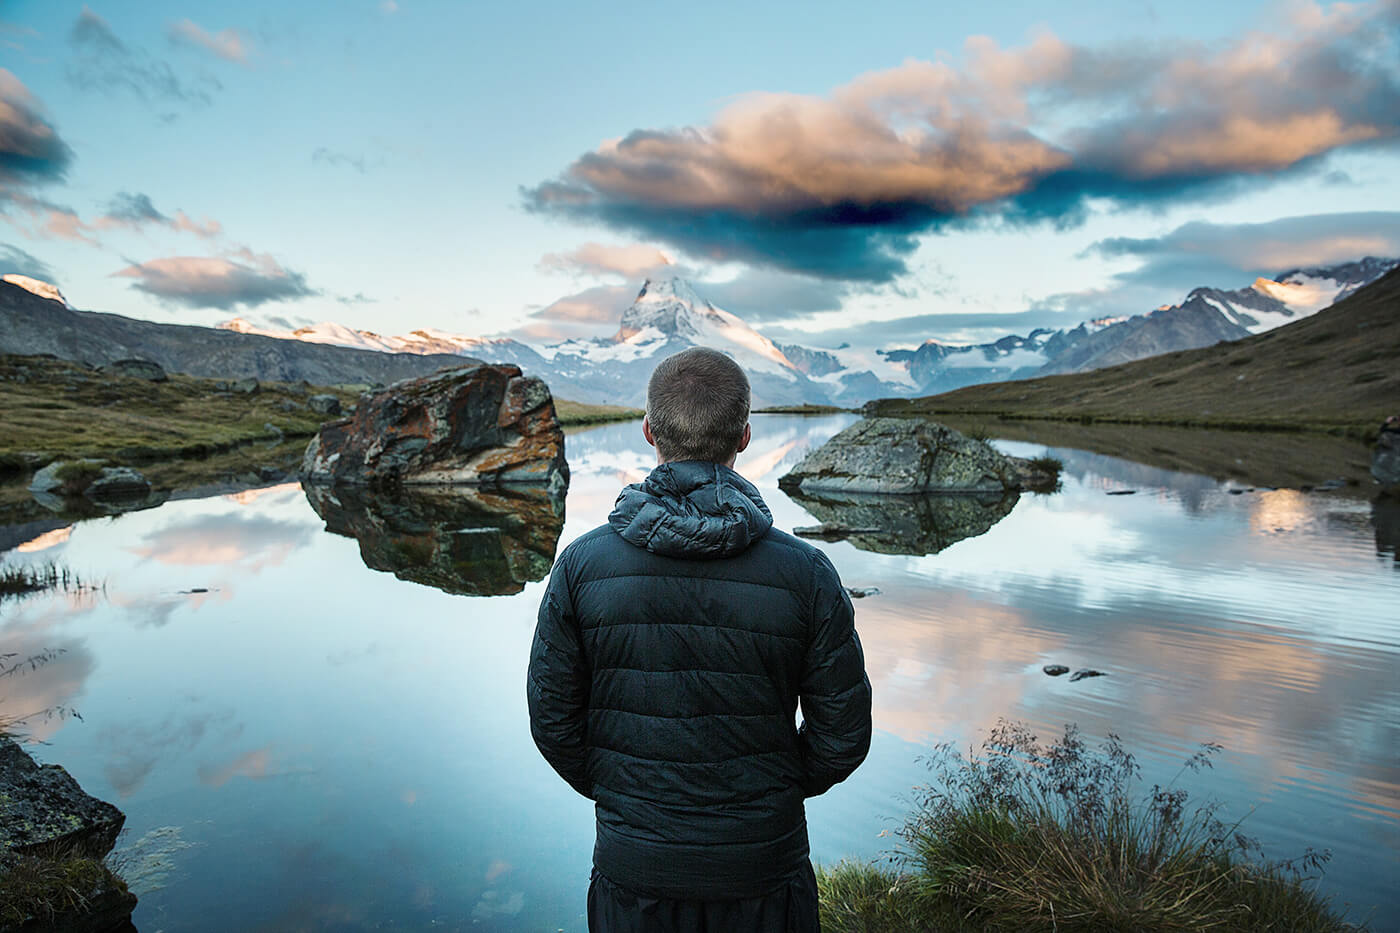 A man looking at a beautiful lake and mountains landscape in Switzerland